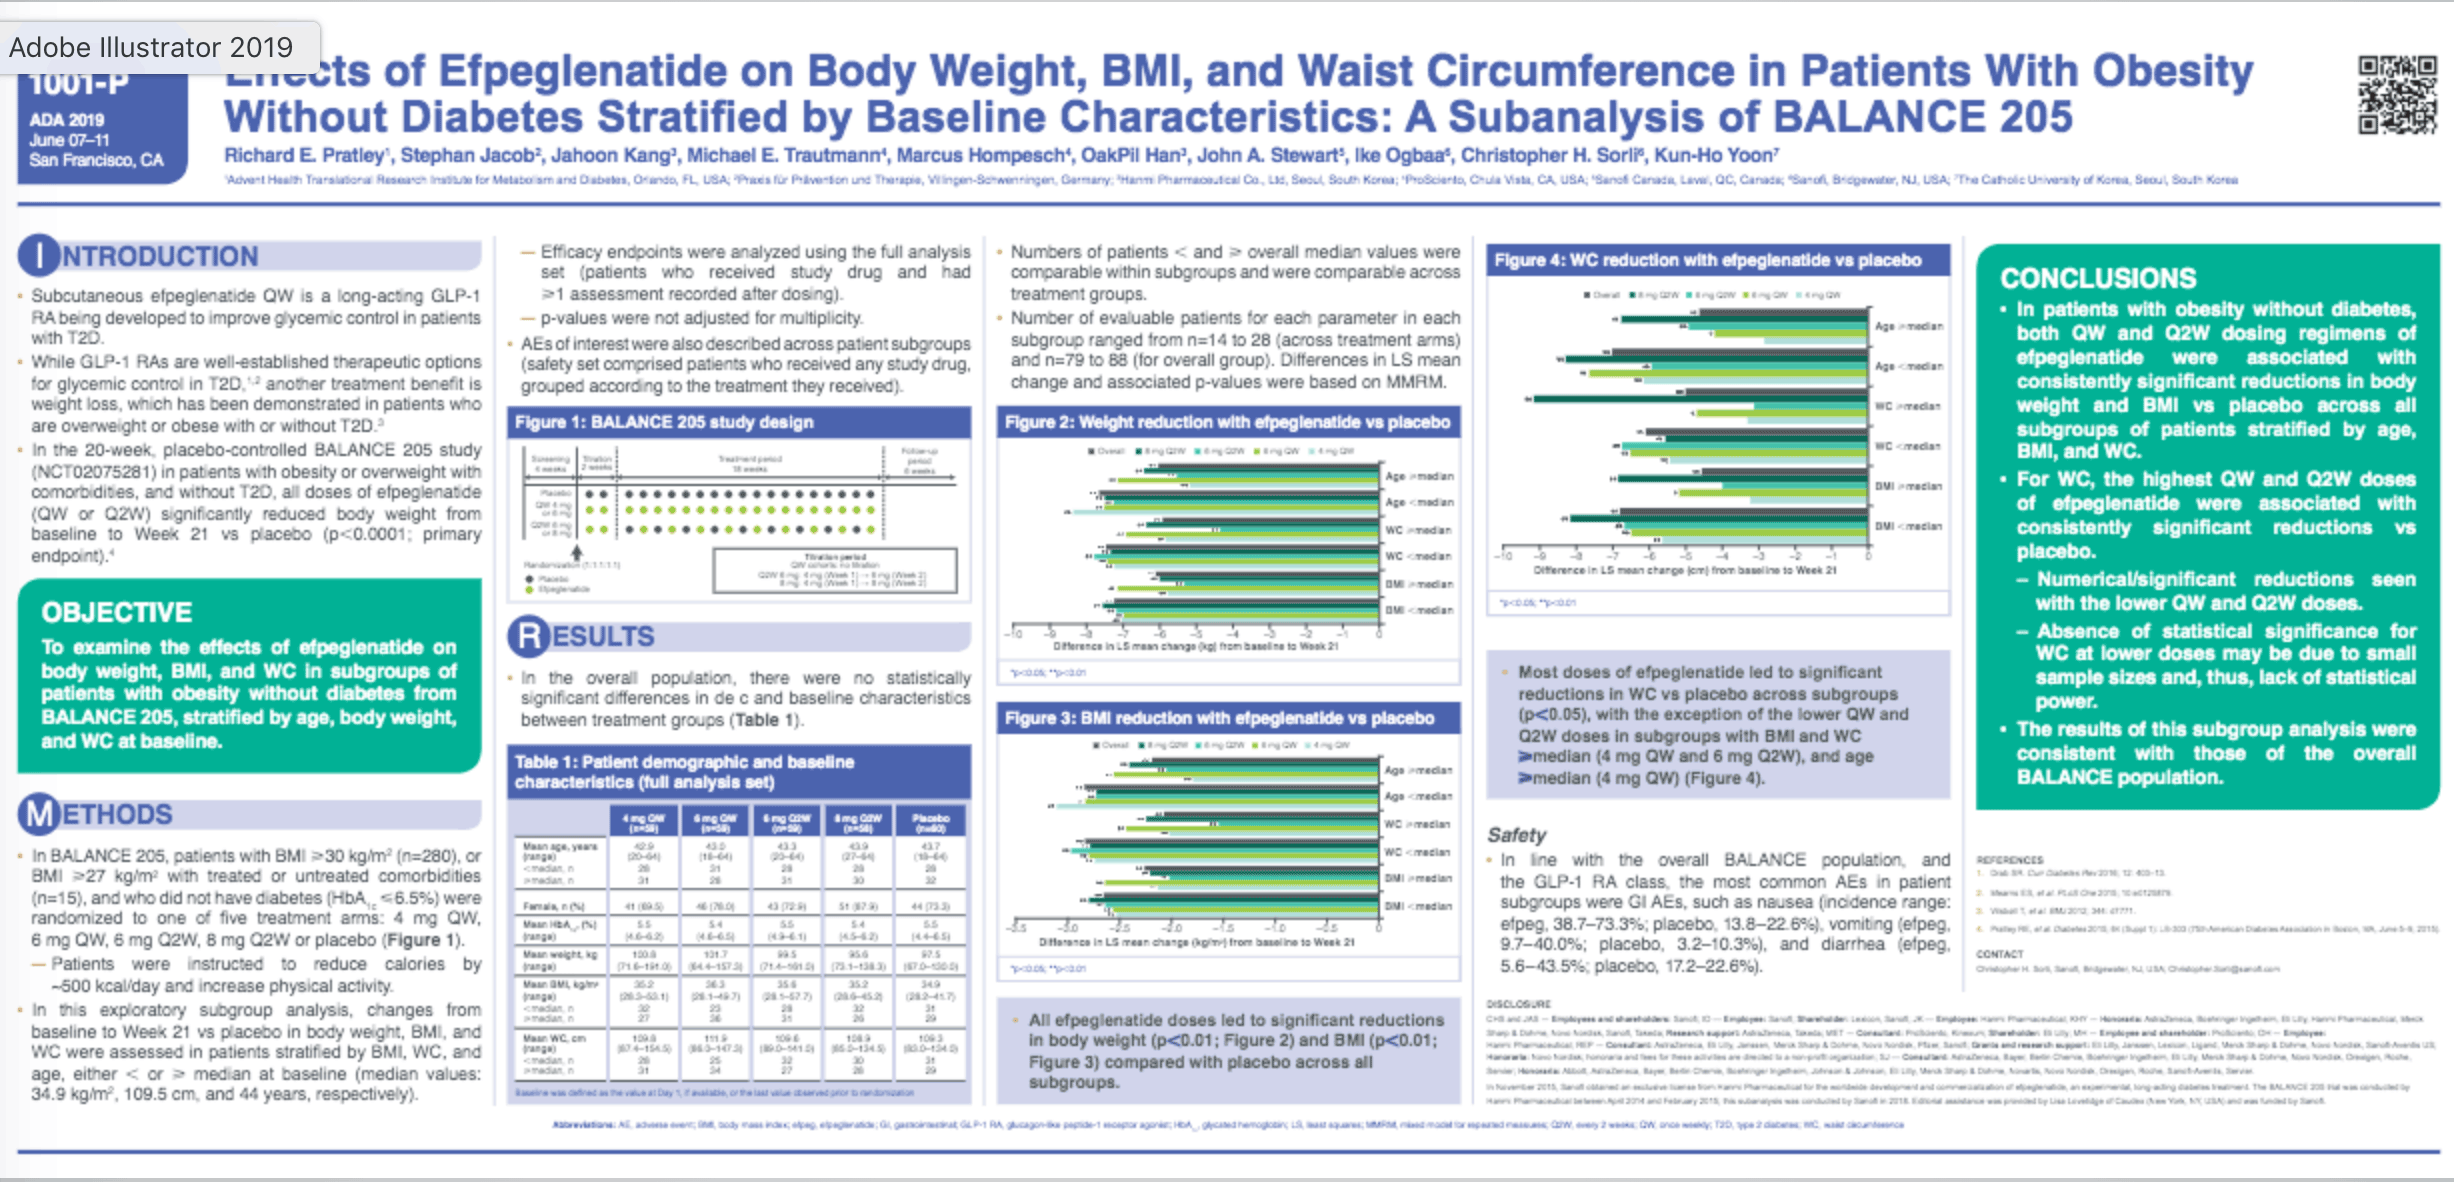 image of Efficacy of Efpeglenatide in Patients with Obesity and Prediabetes: A Subanalysis of the BALANCE 205 Study